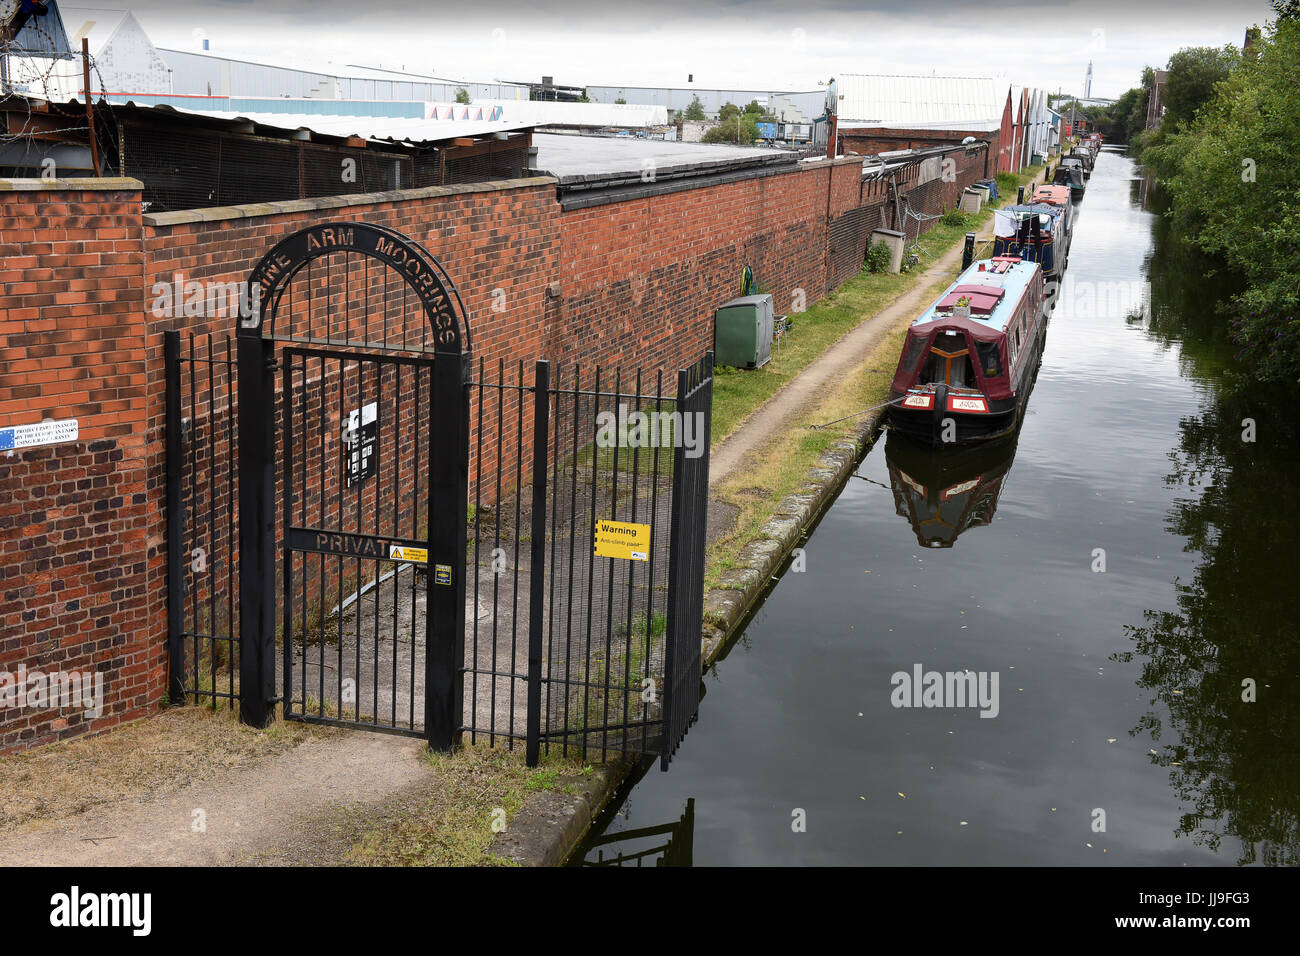 Gated security for the Engine Arm Residential Moorings on a dead-end arm of the Birmingham Canal Navigation in Smethwick, West Midlands, Uk Stock Photo